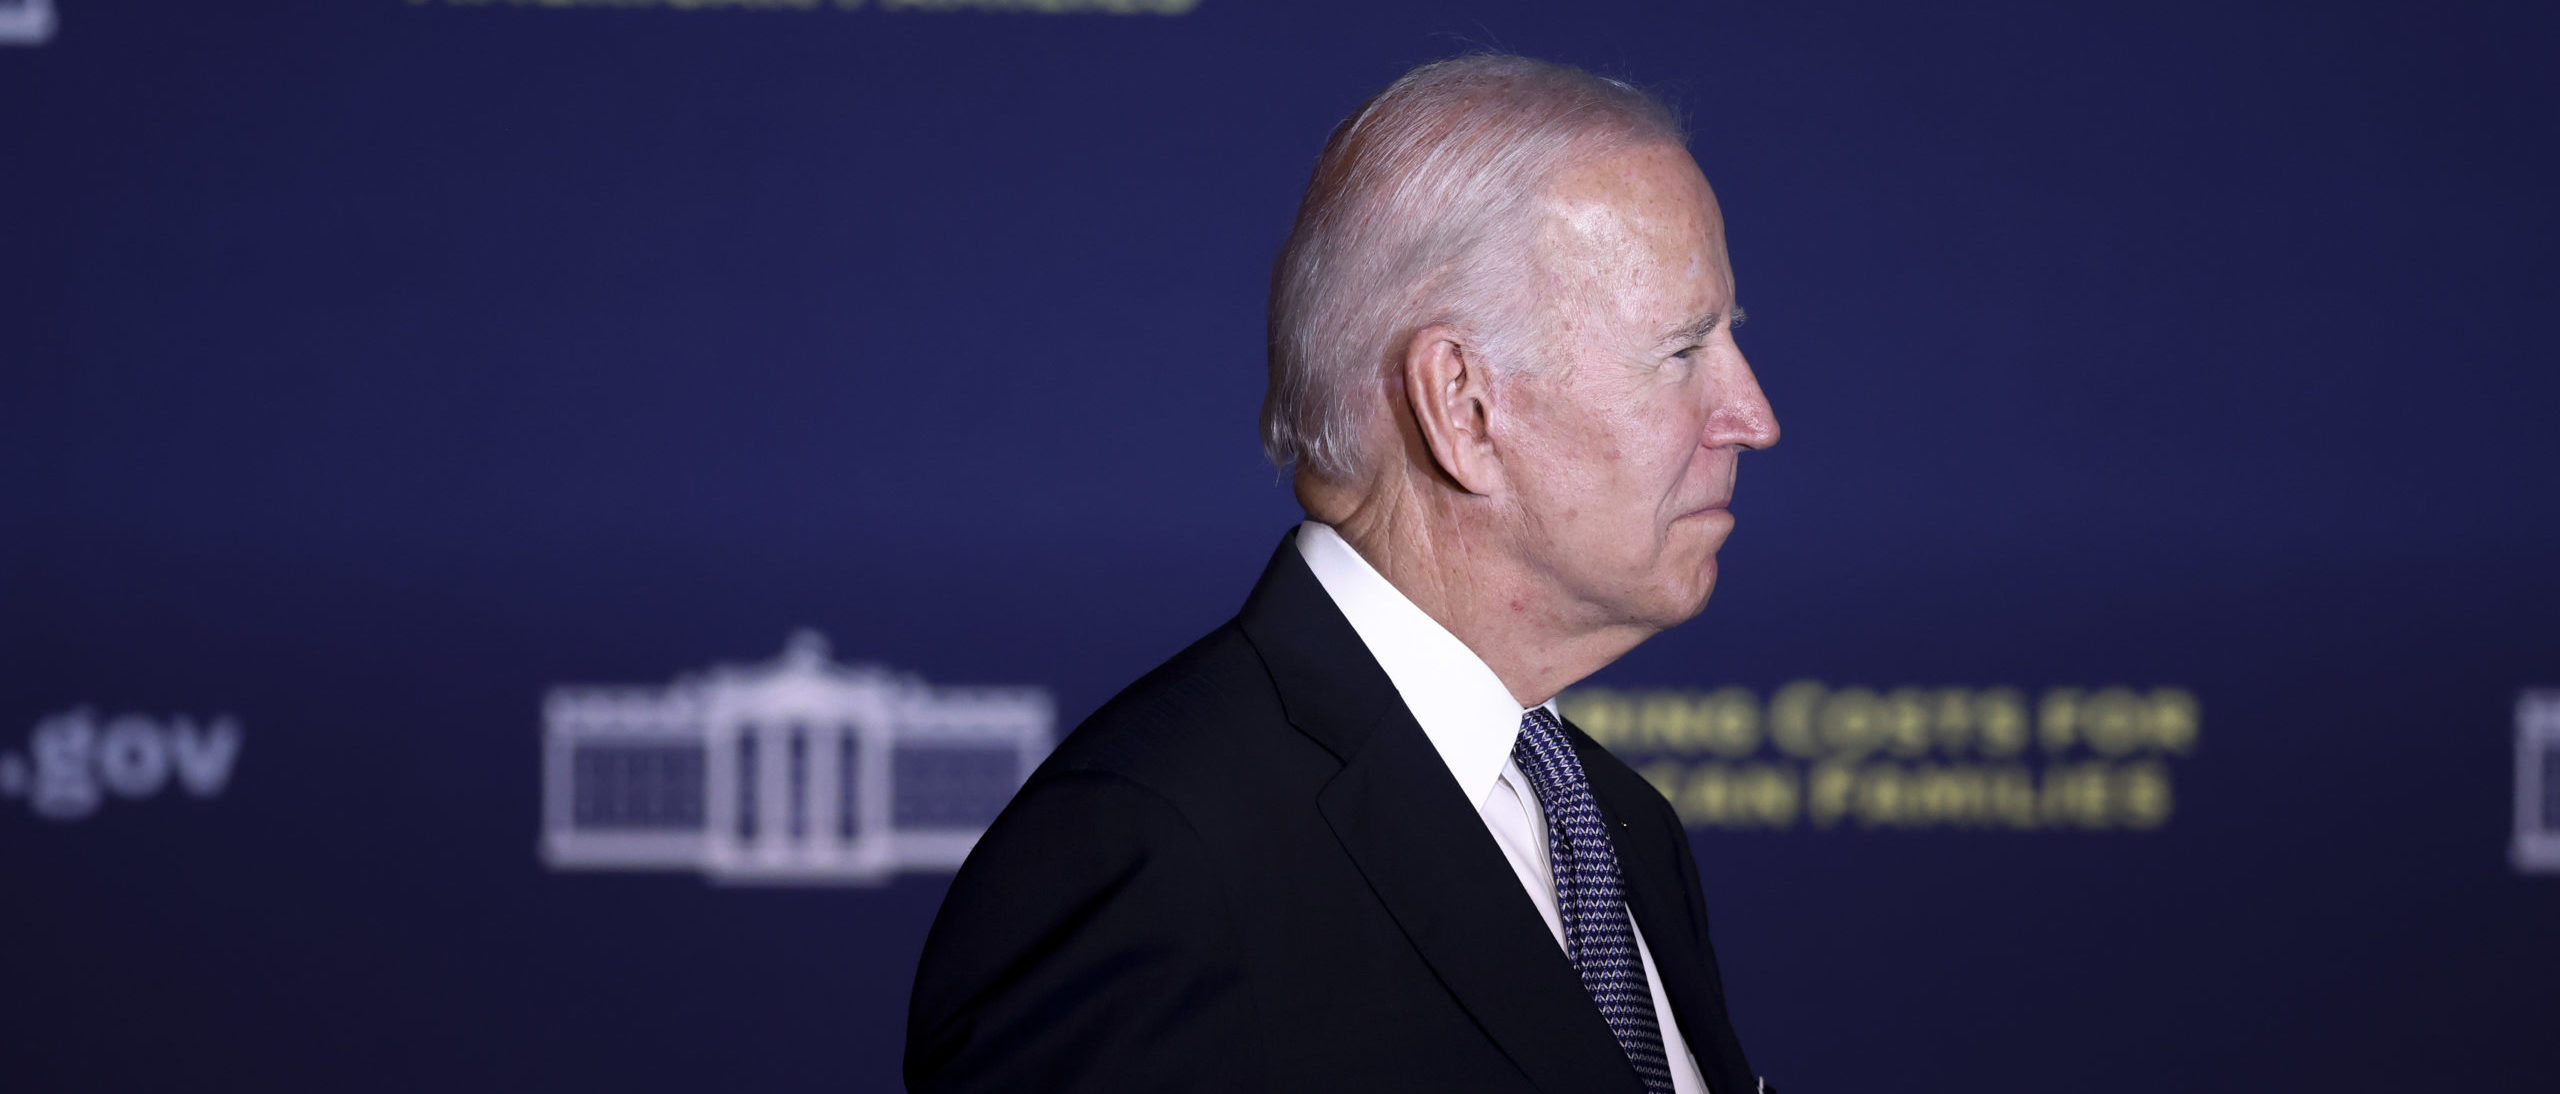 Federal Court Temporarily Stops Biden From Canceling Student Loan Debt